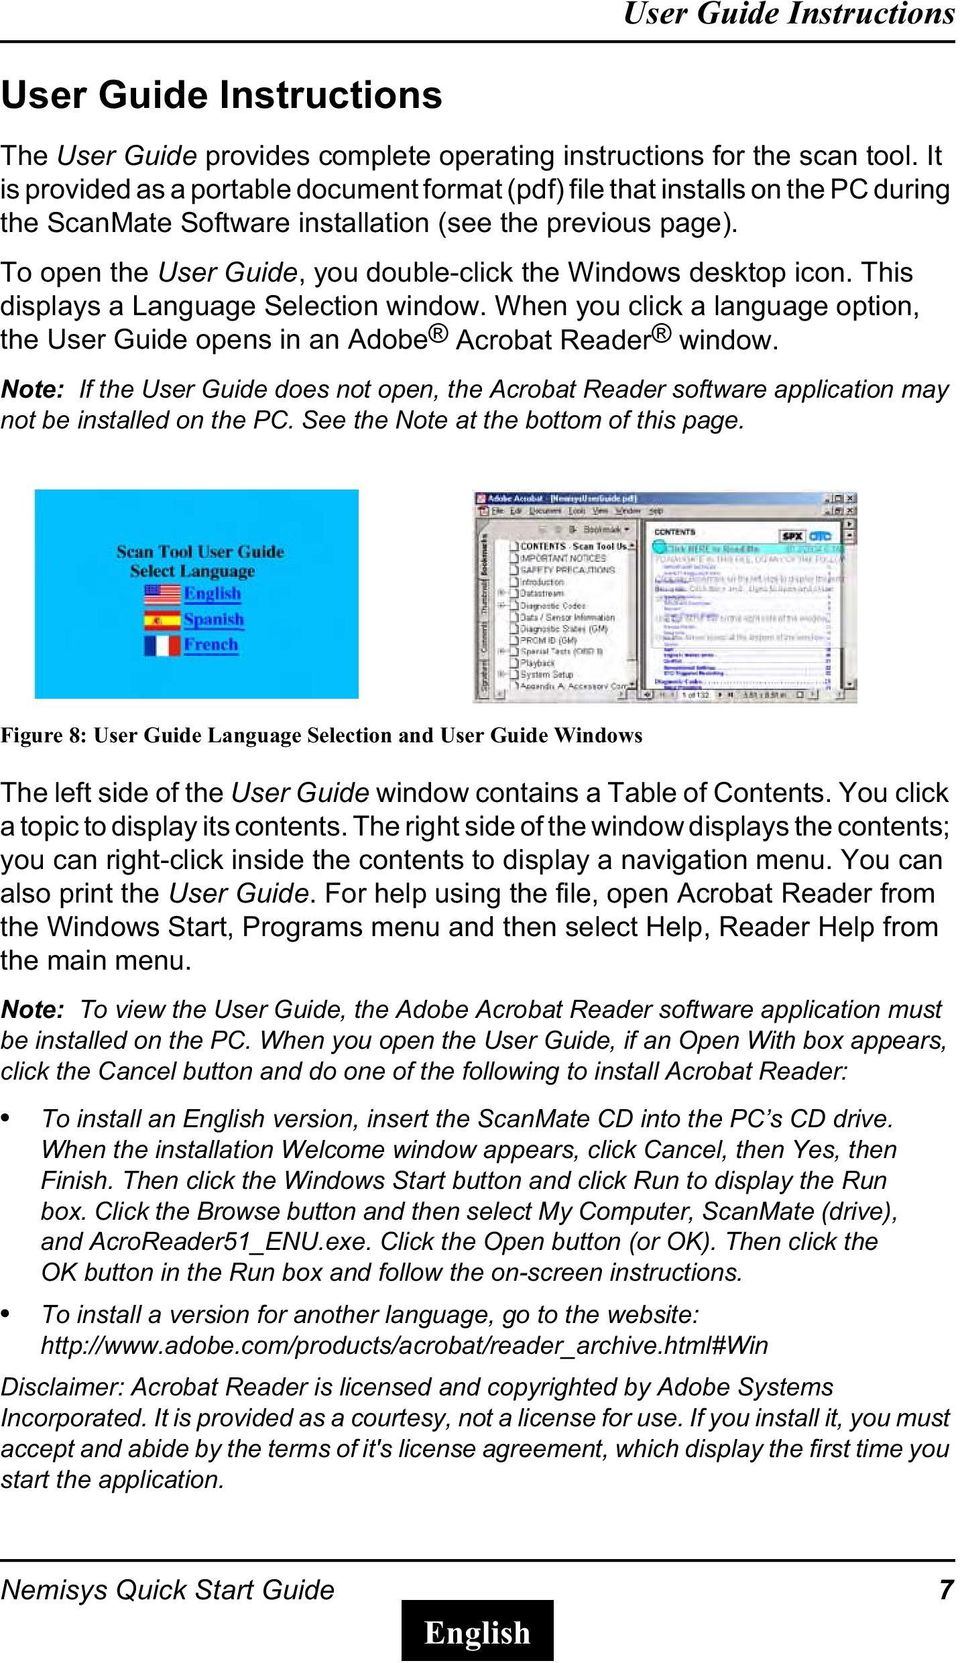 To open the User Guide, you double-click the Windows desktop icon. This displays a Language Selection window. When you click a language option, the User Guide opens in an Adobe Acrobat Reader window.